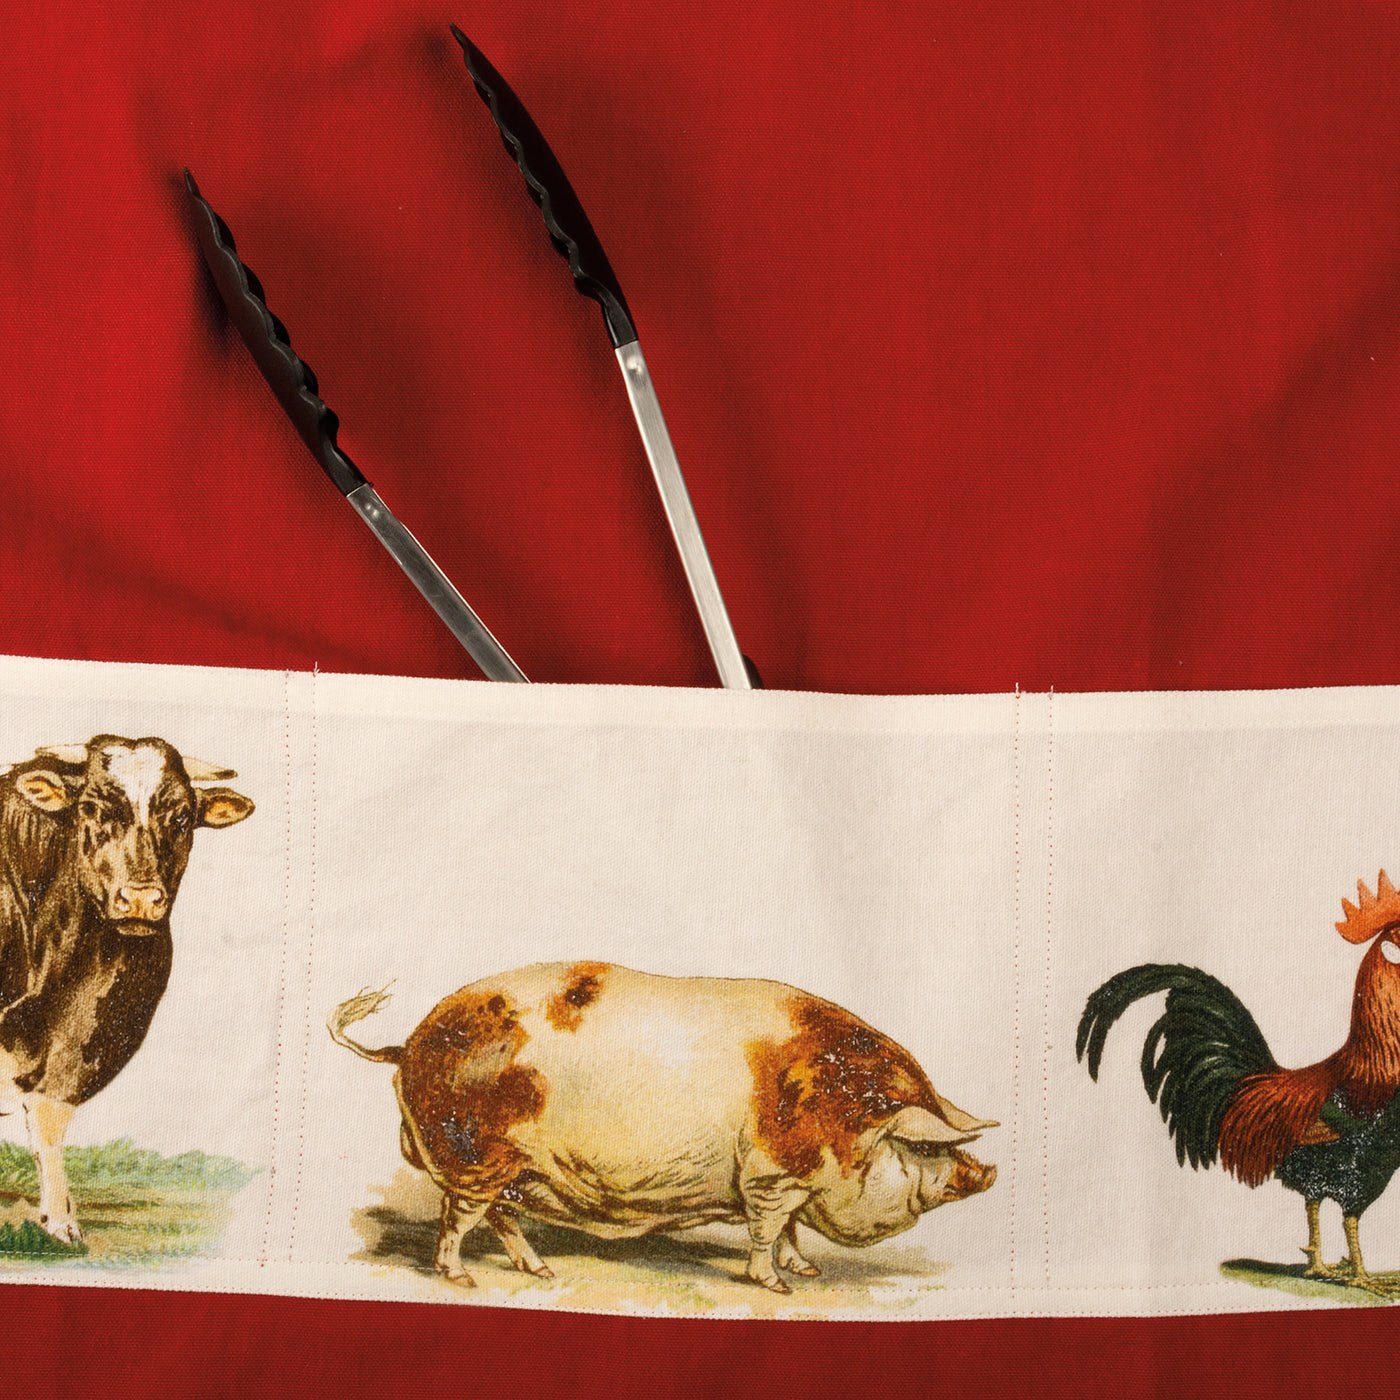 Cow Pig & Chicken Walk Into A BBQ The End Apron